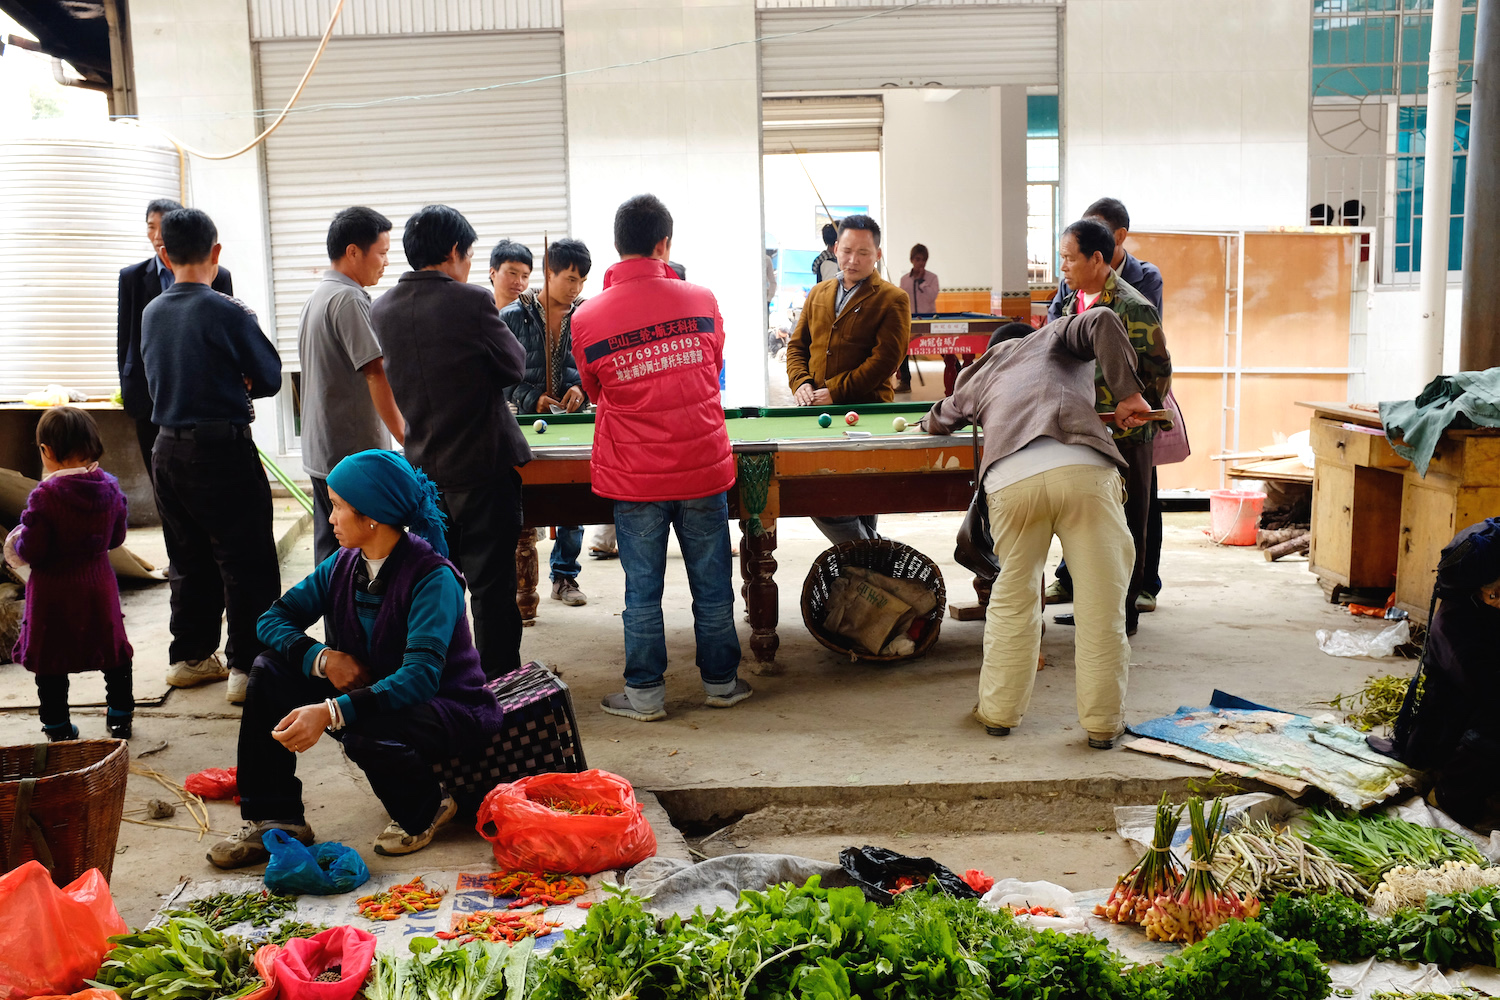 The men relax while the women sell vegetables